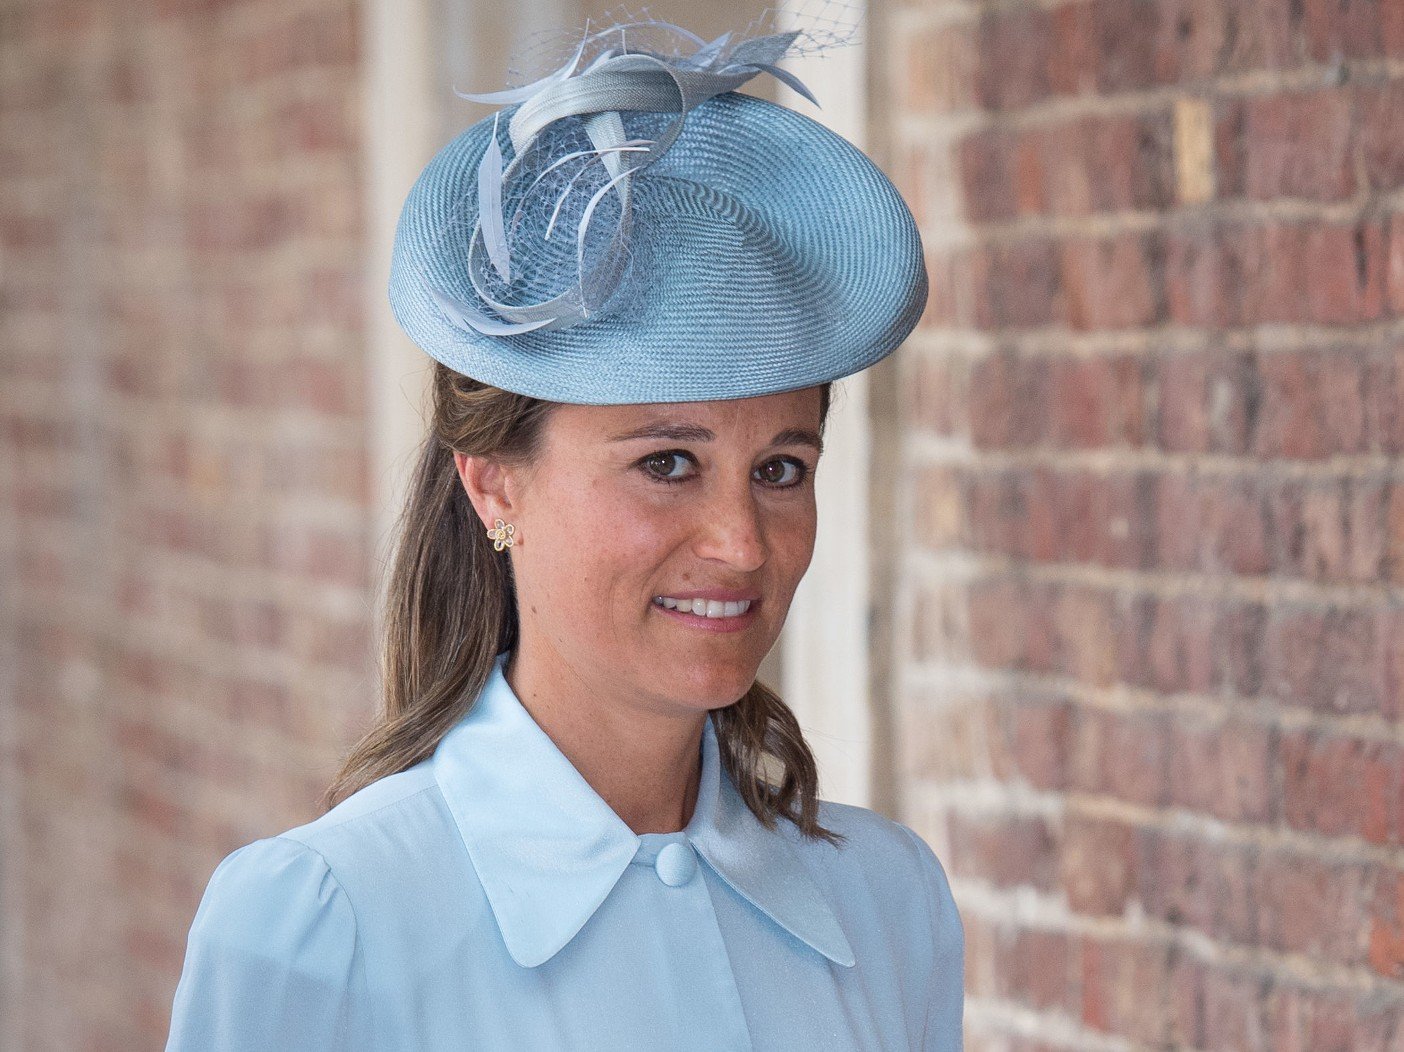 Pippa Middleton’s sister Kate isn’t her only connection to the Royal Family